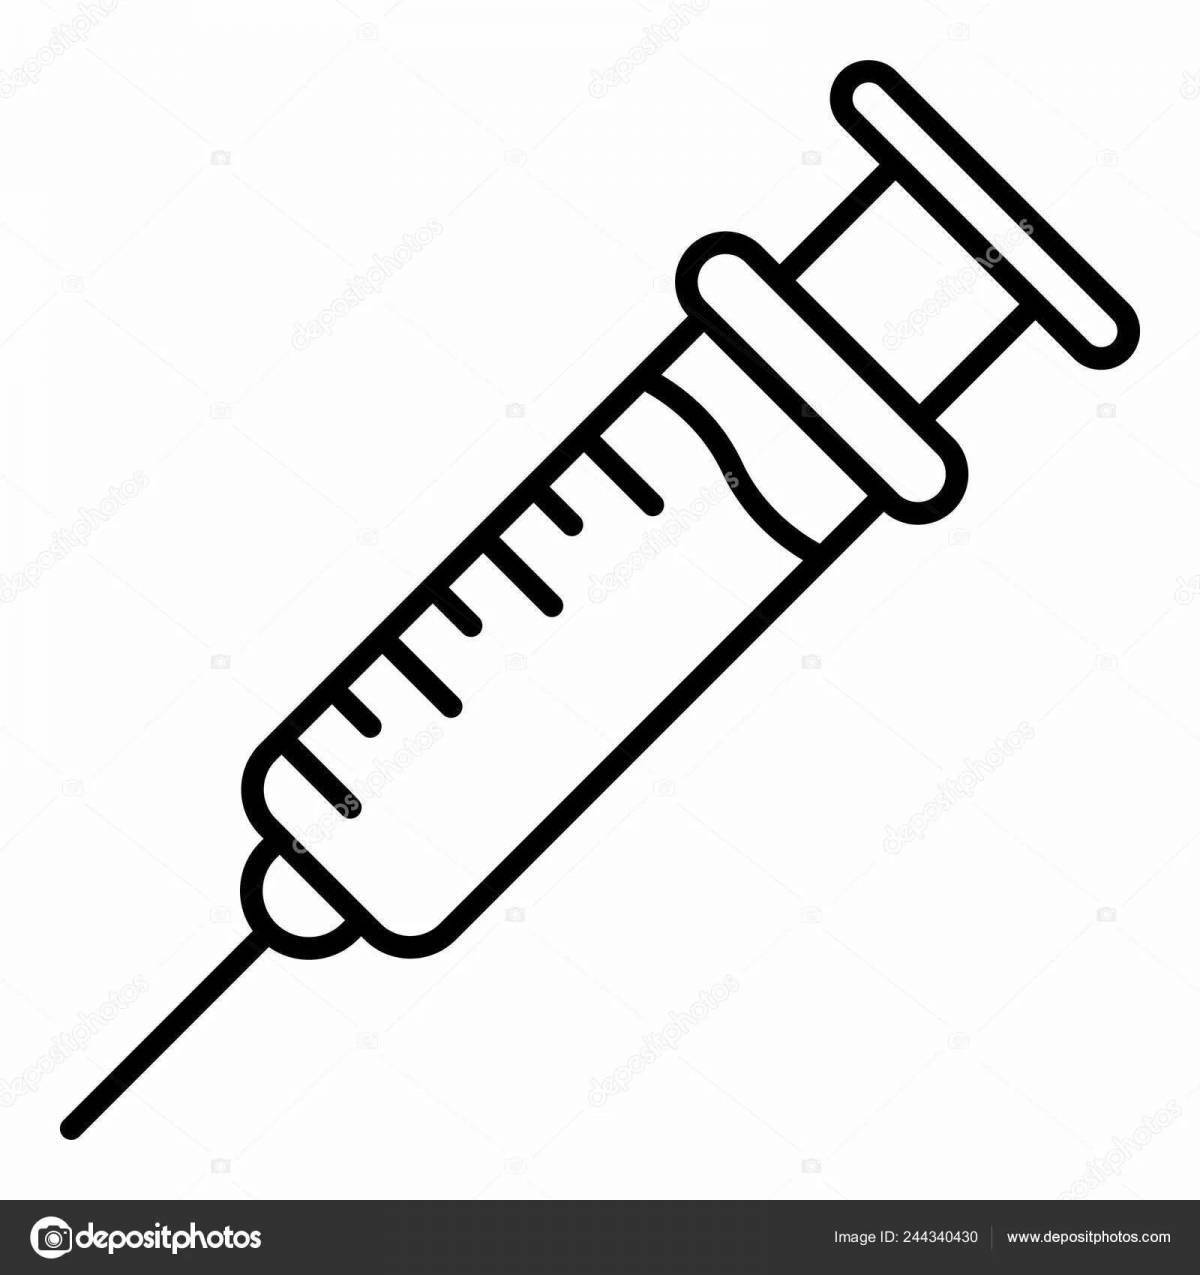 Great syringe coloring book for kids